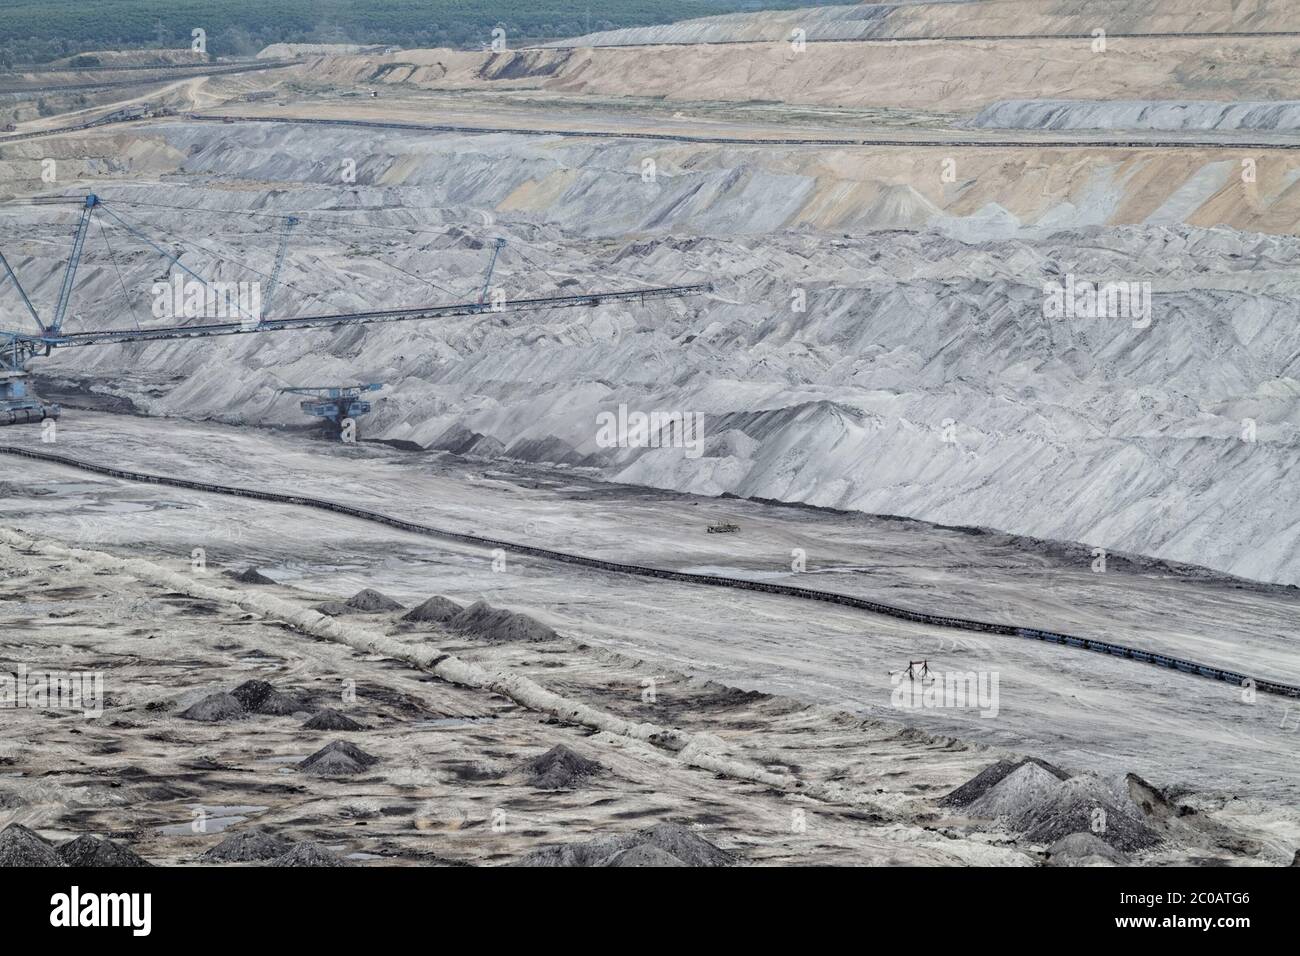 Coal mining in an open pit Stock Photo